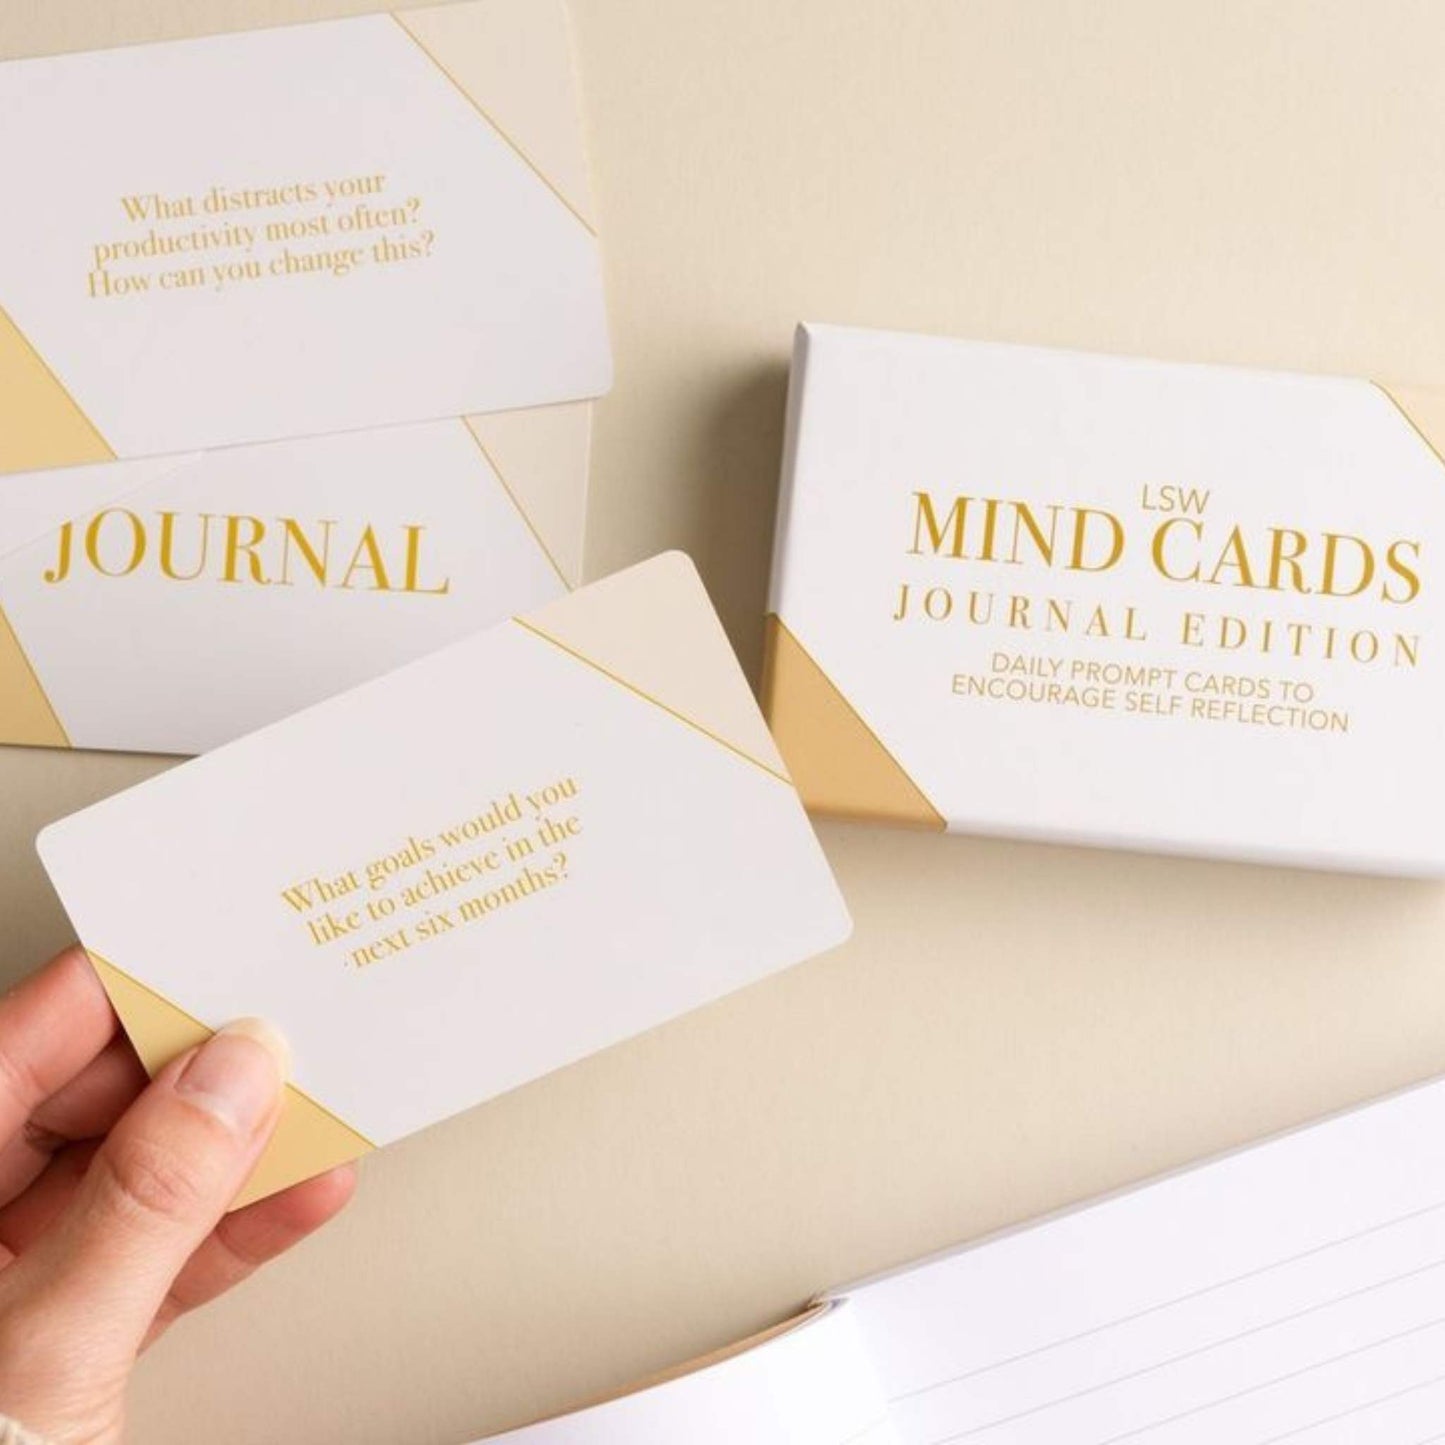 LSW Mind Cards - Journal Edition